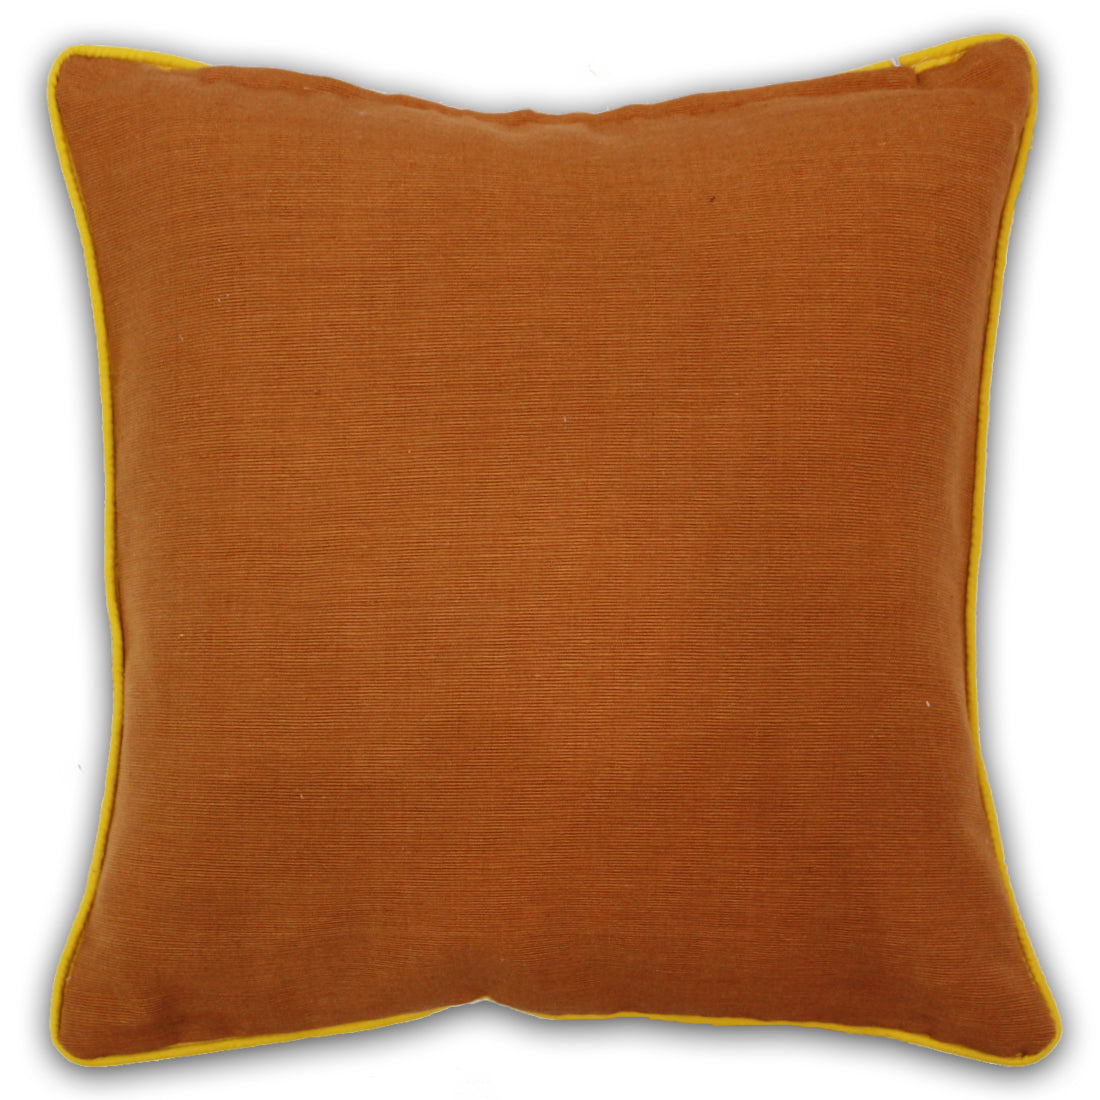 Soft Woven Corded Stripe Cotton Cushion Cover Set in Brown online at best prices(1Pc)